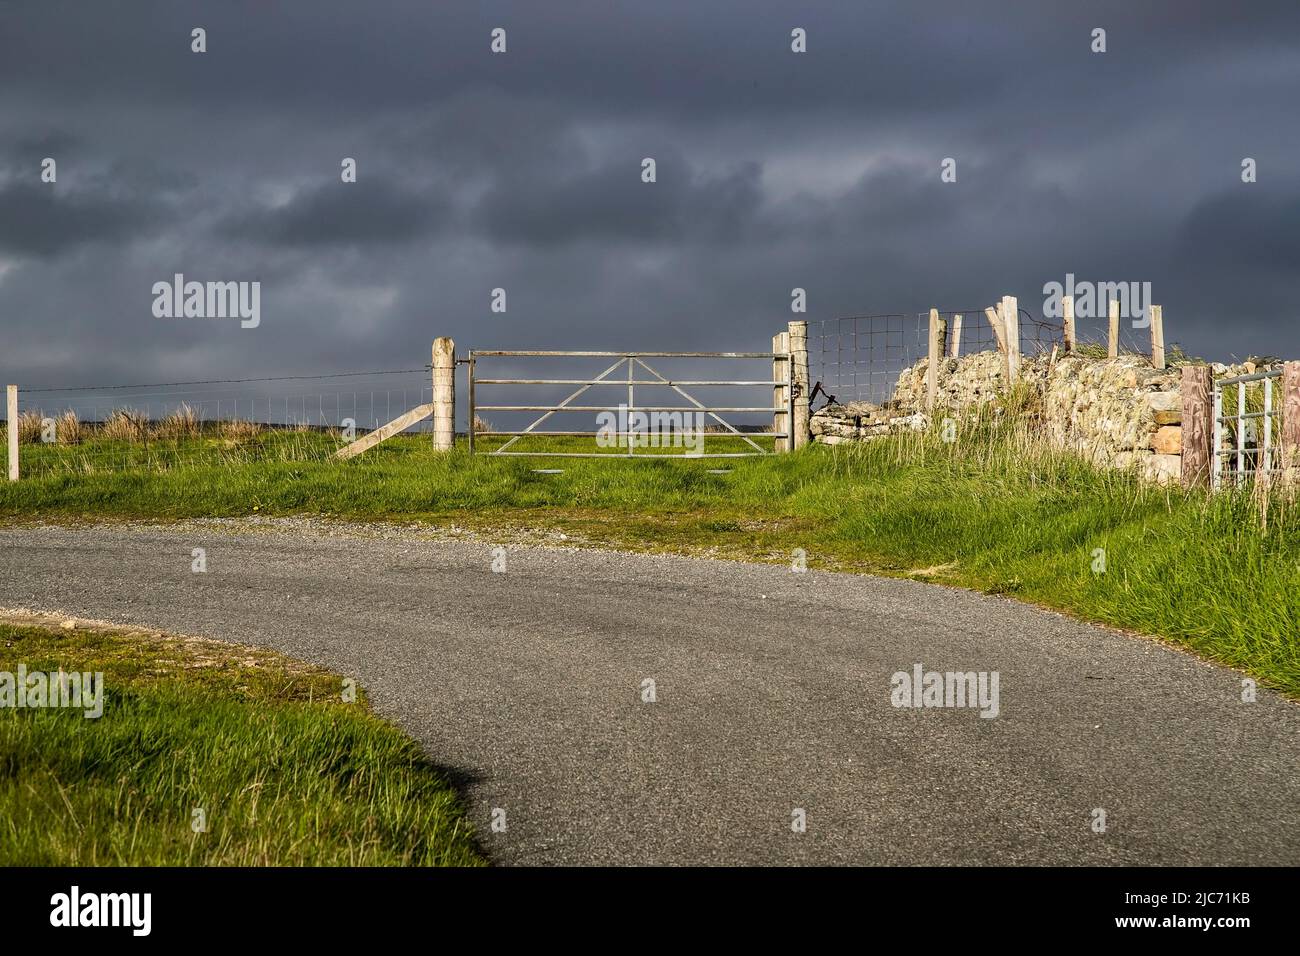 Five bar steel gate on the corner of a country road and entrance to farmland with dark gathering clouds beyond heralding an approaching storm Stock Photo